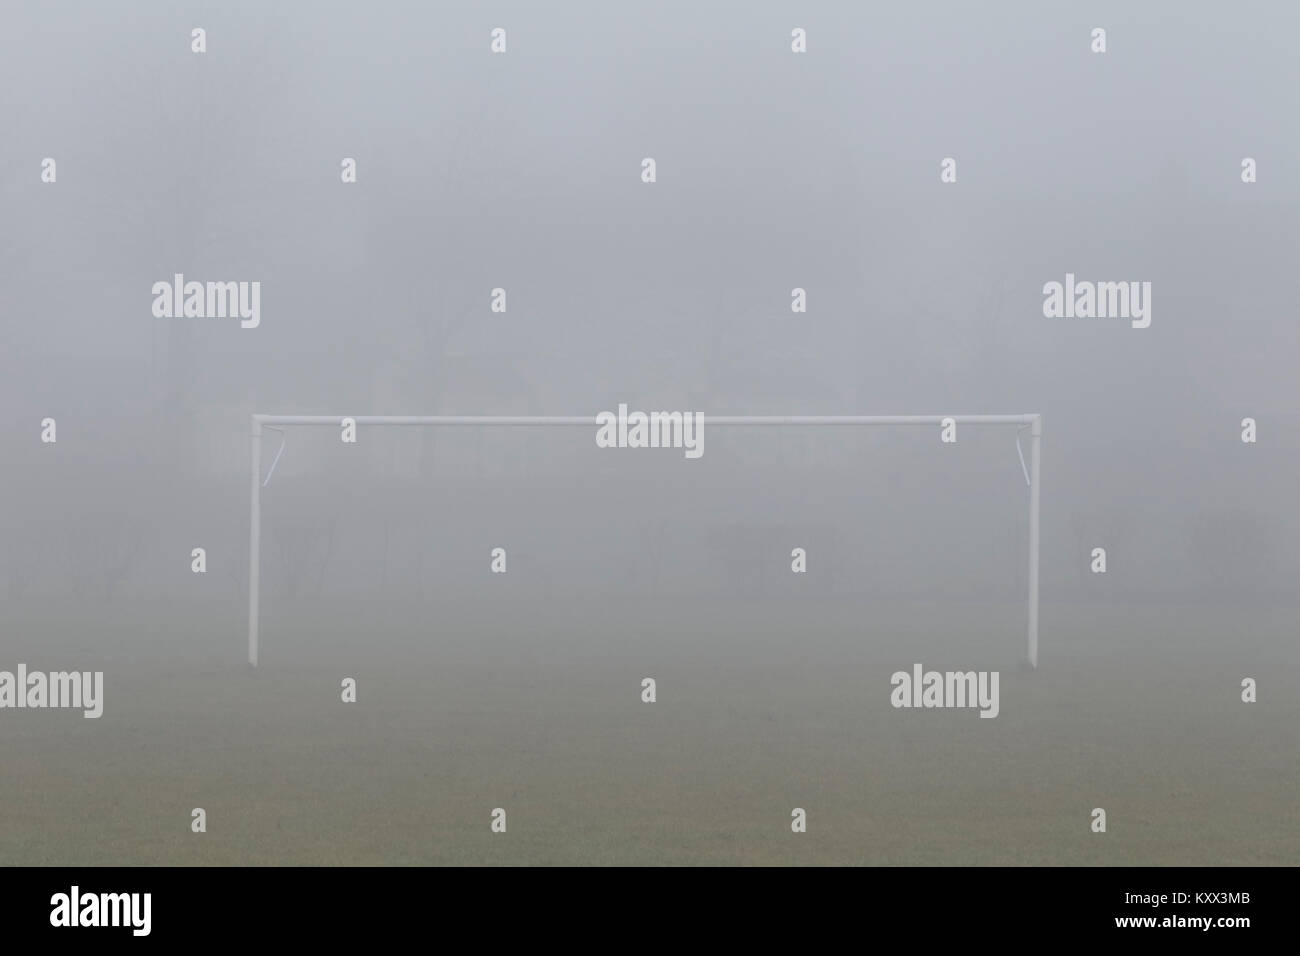 football soccer goalposts on a pitch in a foggy day in the uk Stock Photo